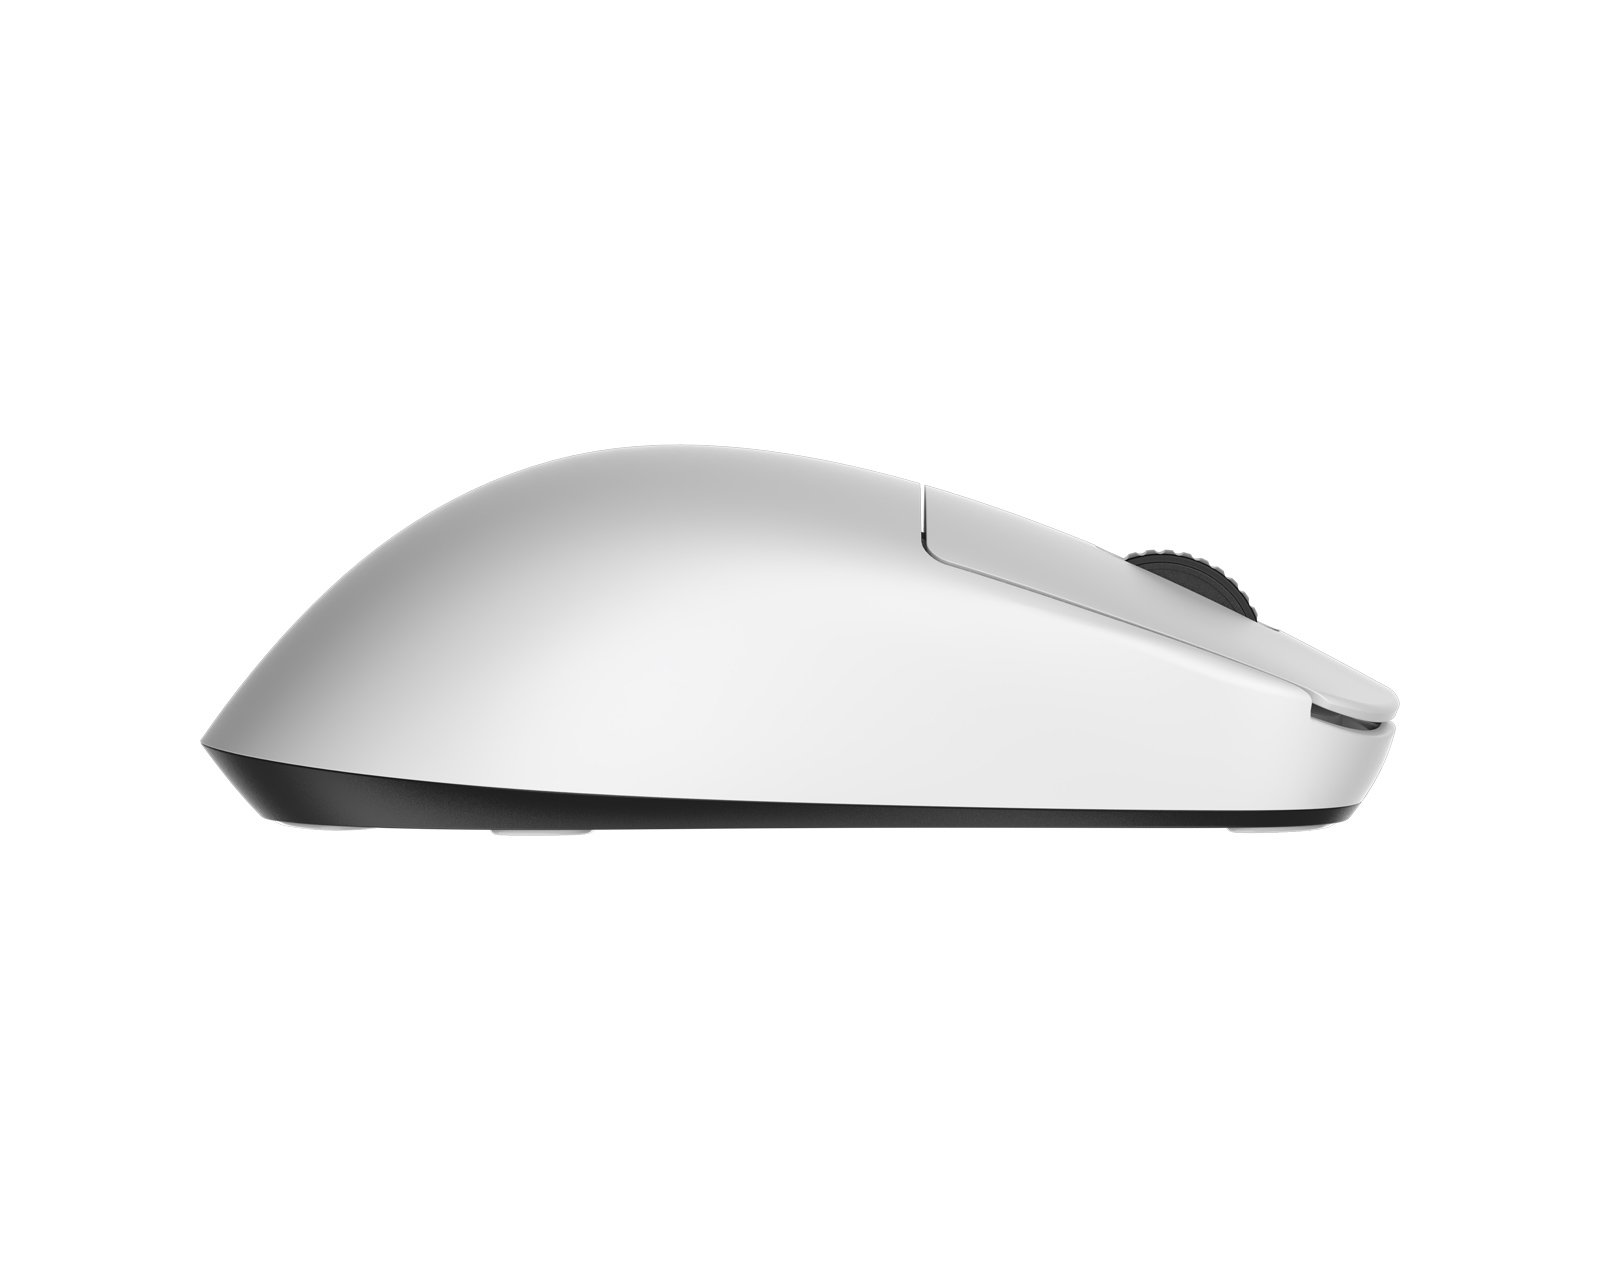 Endgame Gear OP1we Wireless Gaming Mouse - White